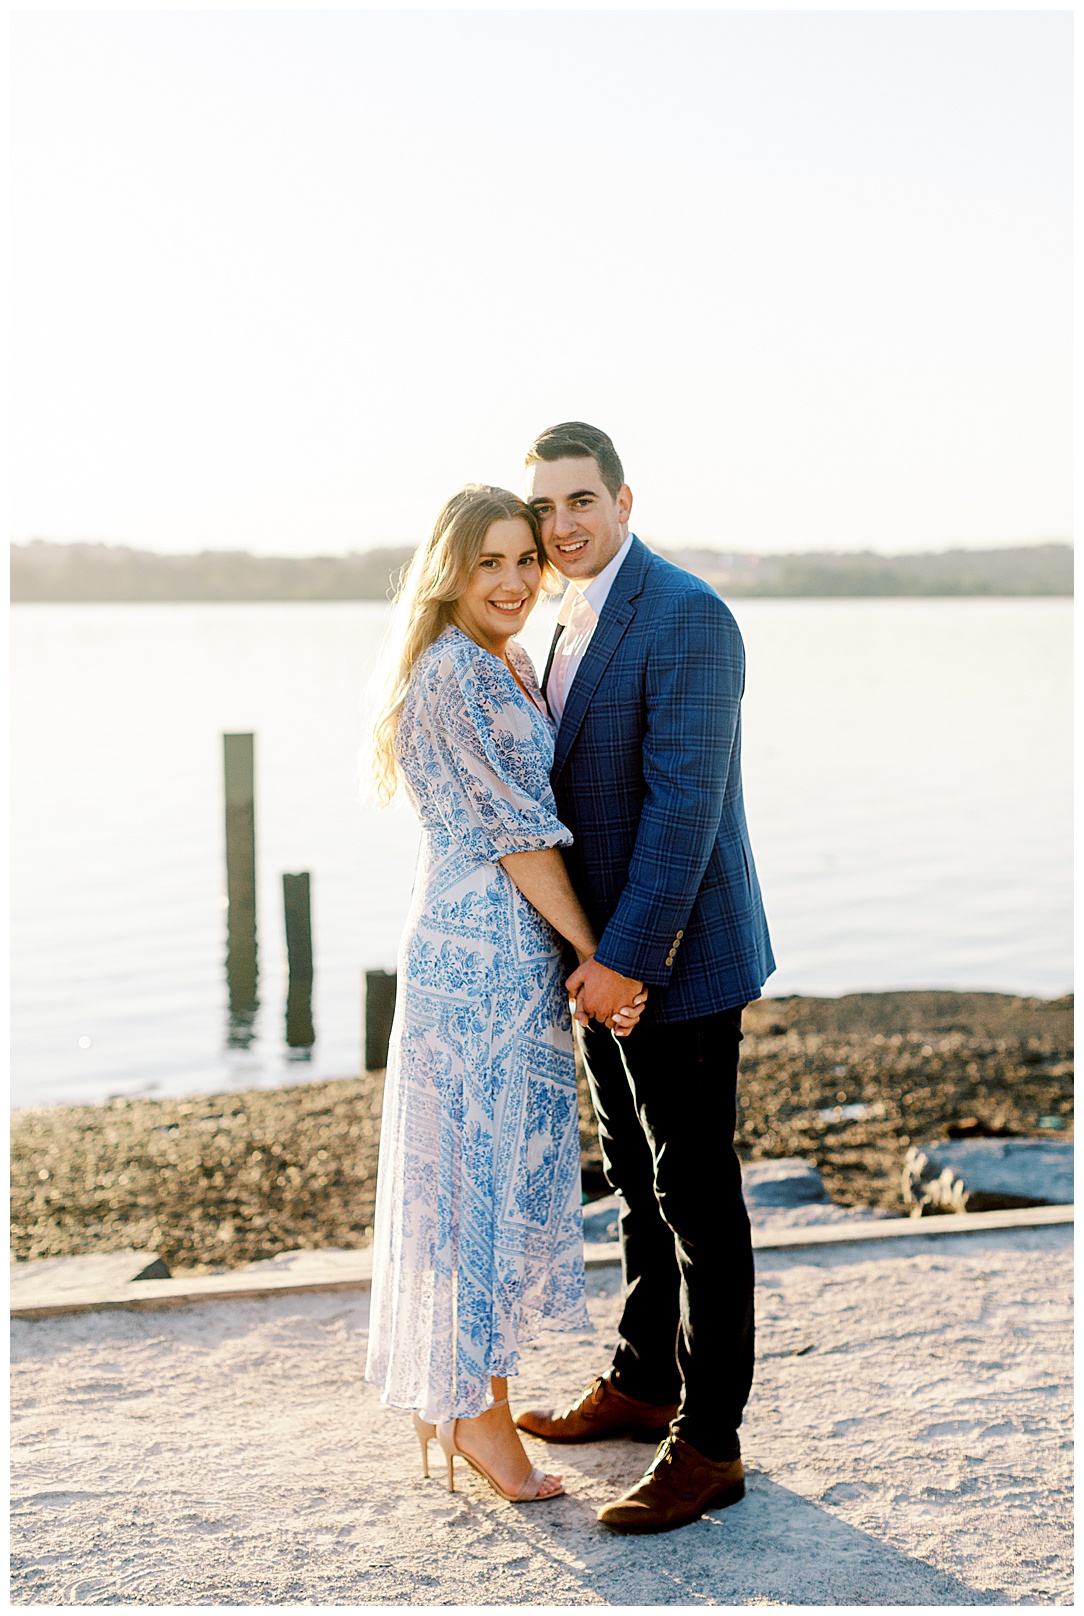 Old Town Alexandria Waterfront - Sunrise Engagement Session near DC